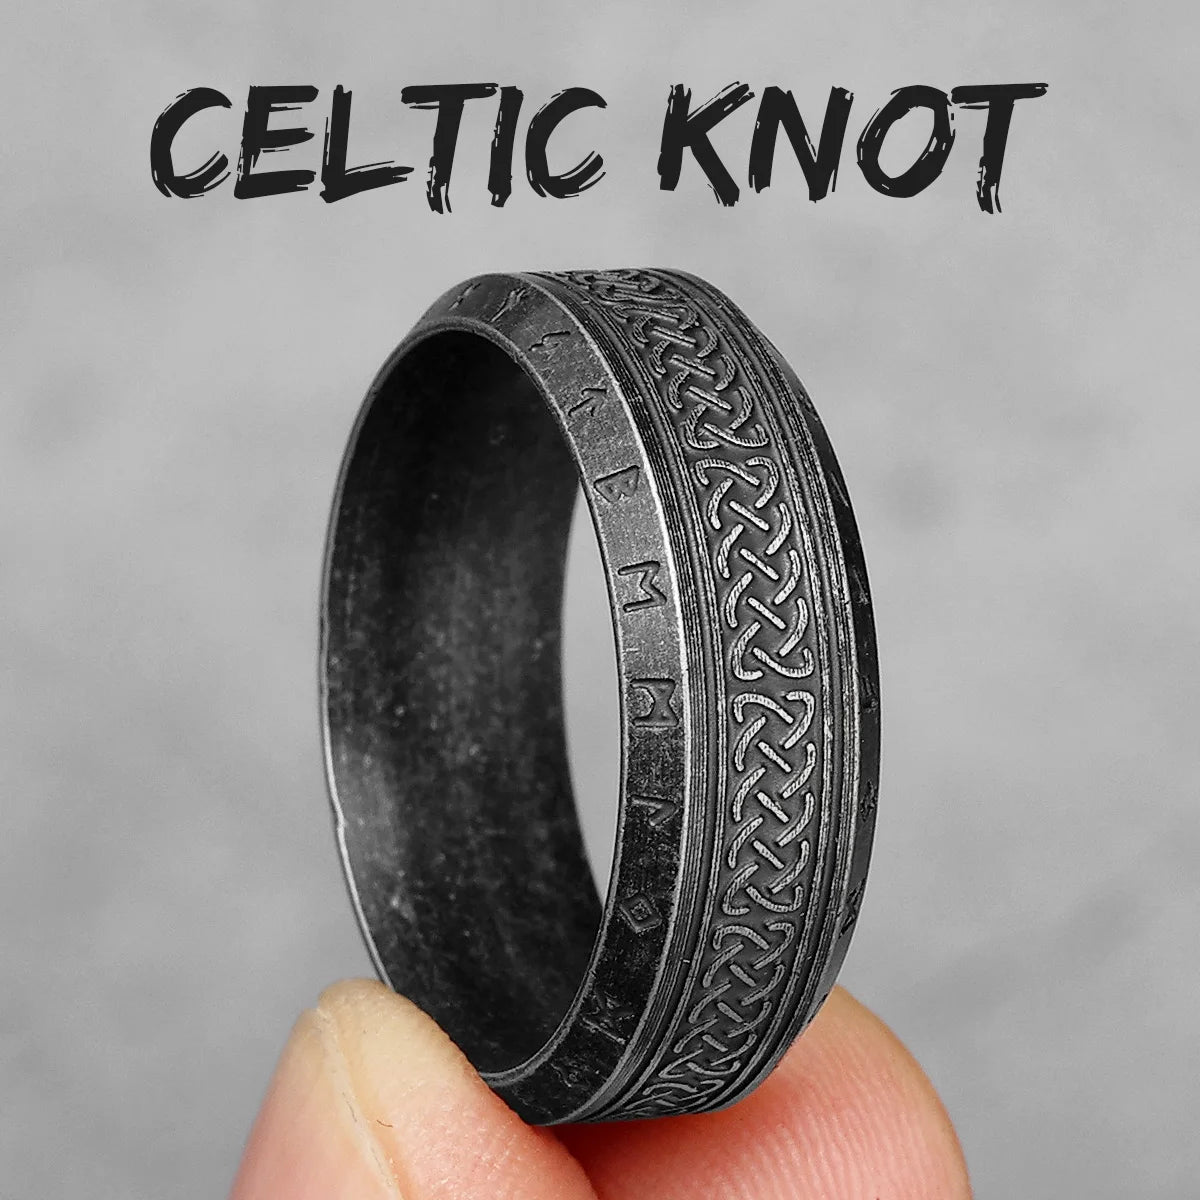 Vintage Edition - Viking Runes Celtic Knot Rings - Mythical Pieces 11 / R1007-Vintage Black